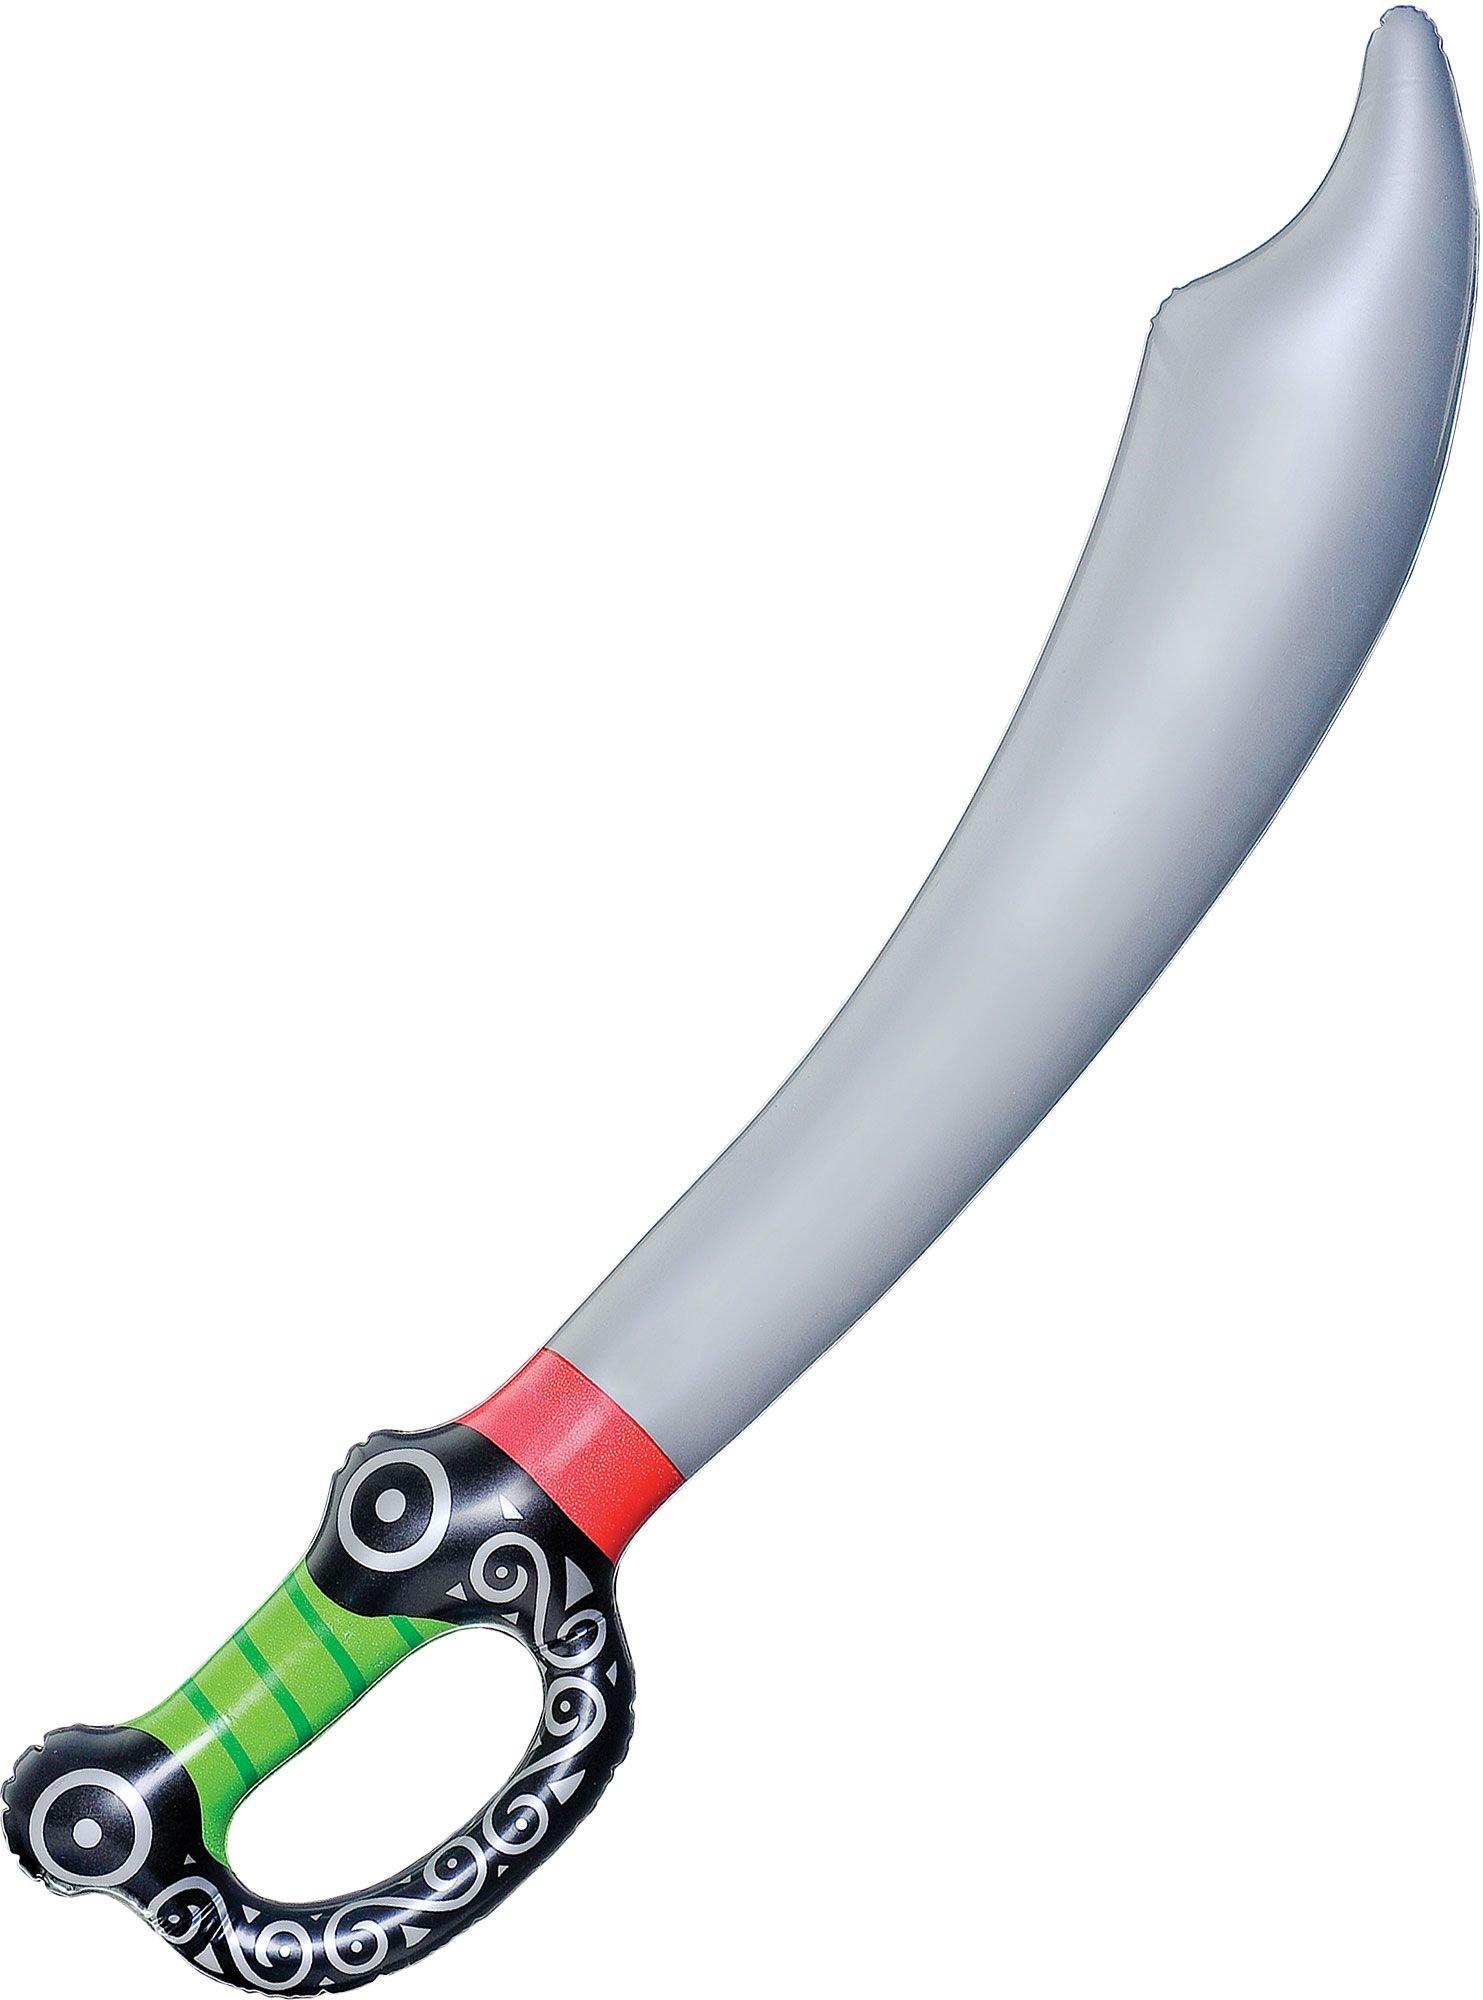 Inflatable Pirate Sword